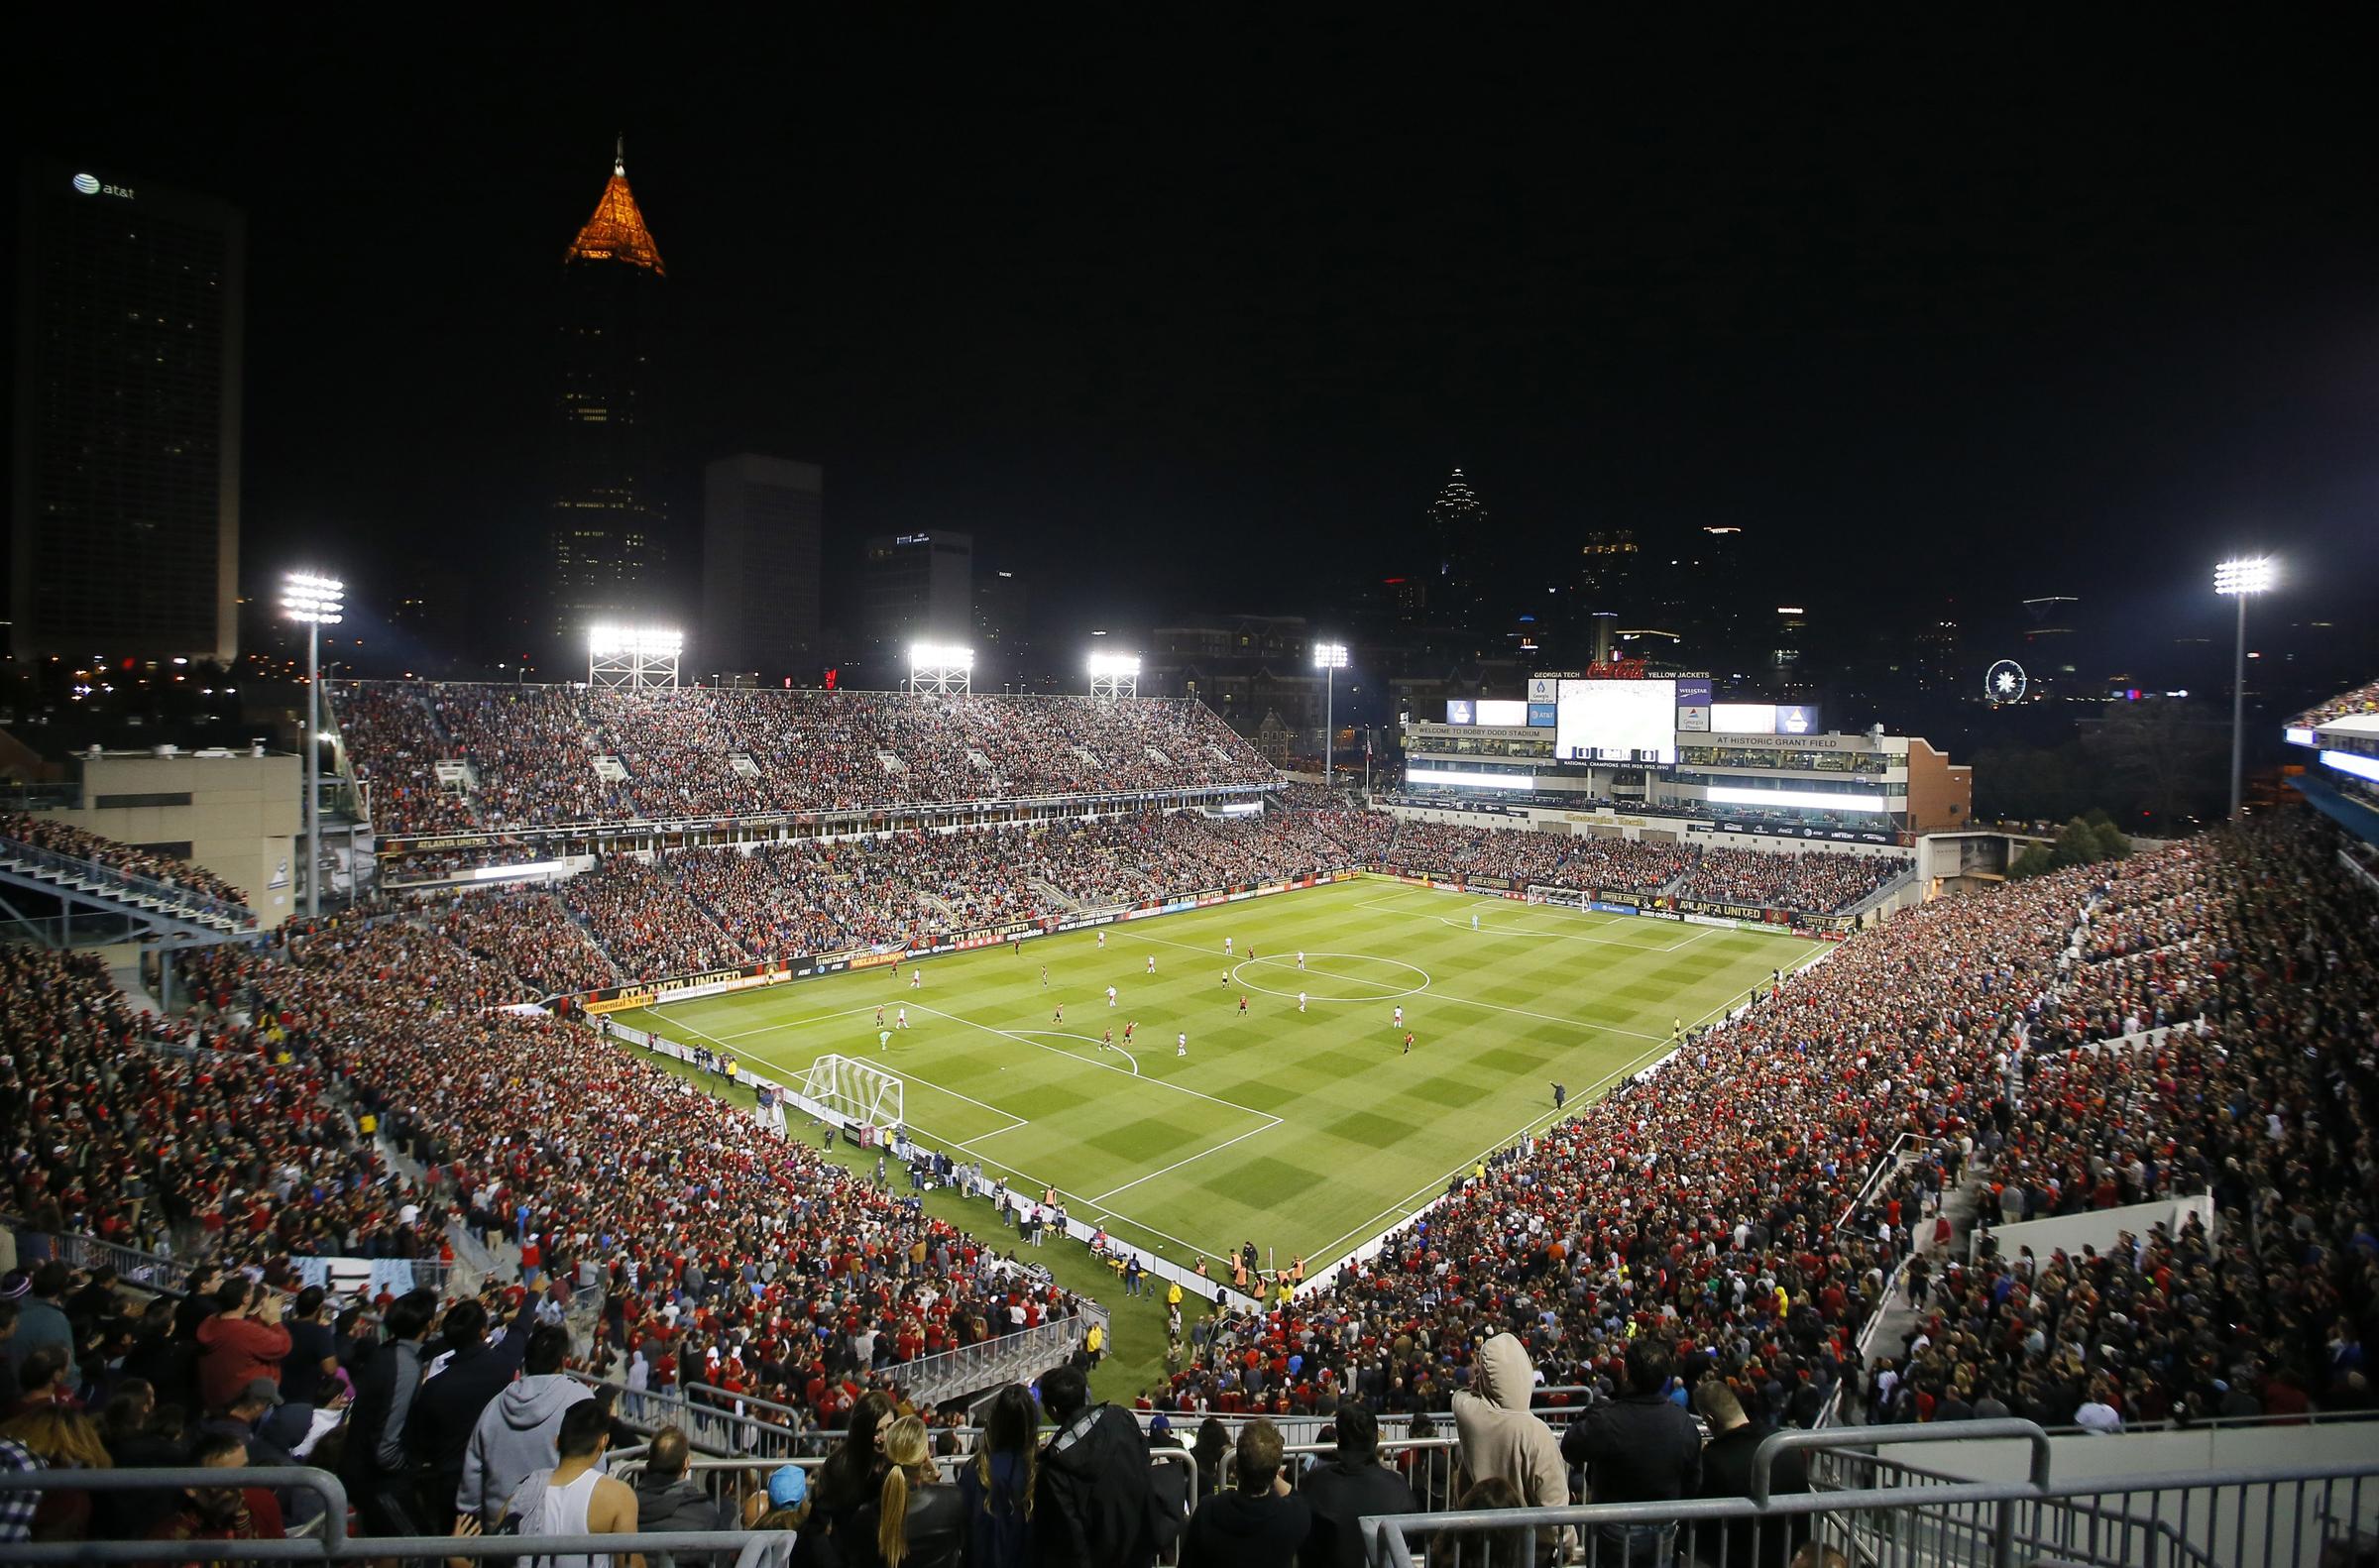 Bobby Dodd Stadium will host CD Chivas de Guadalajara and Club America in the Super Classico Series. This rivalry game has been going on since his 1943 and he is recognized as one of the best international matches.